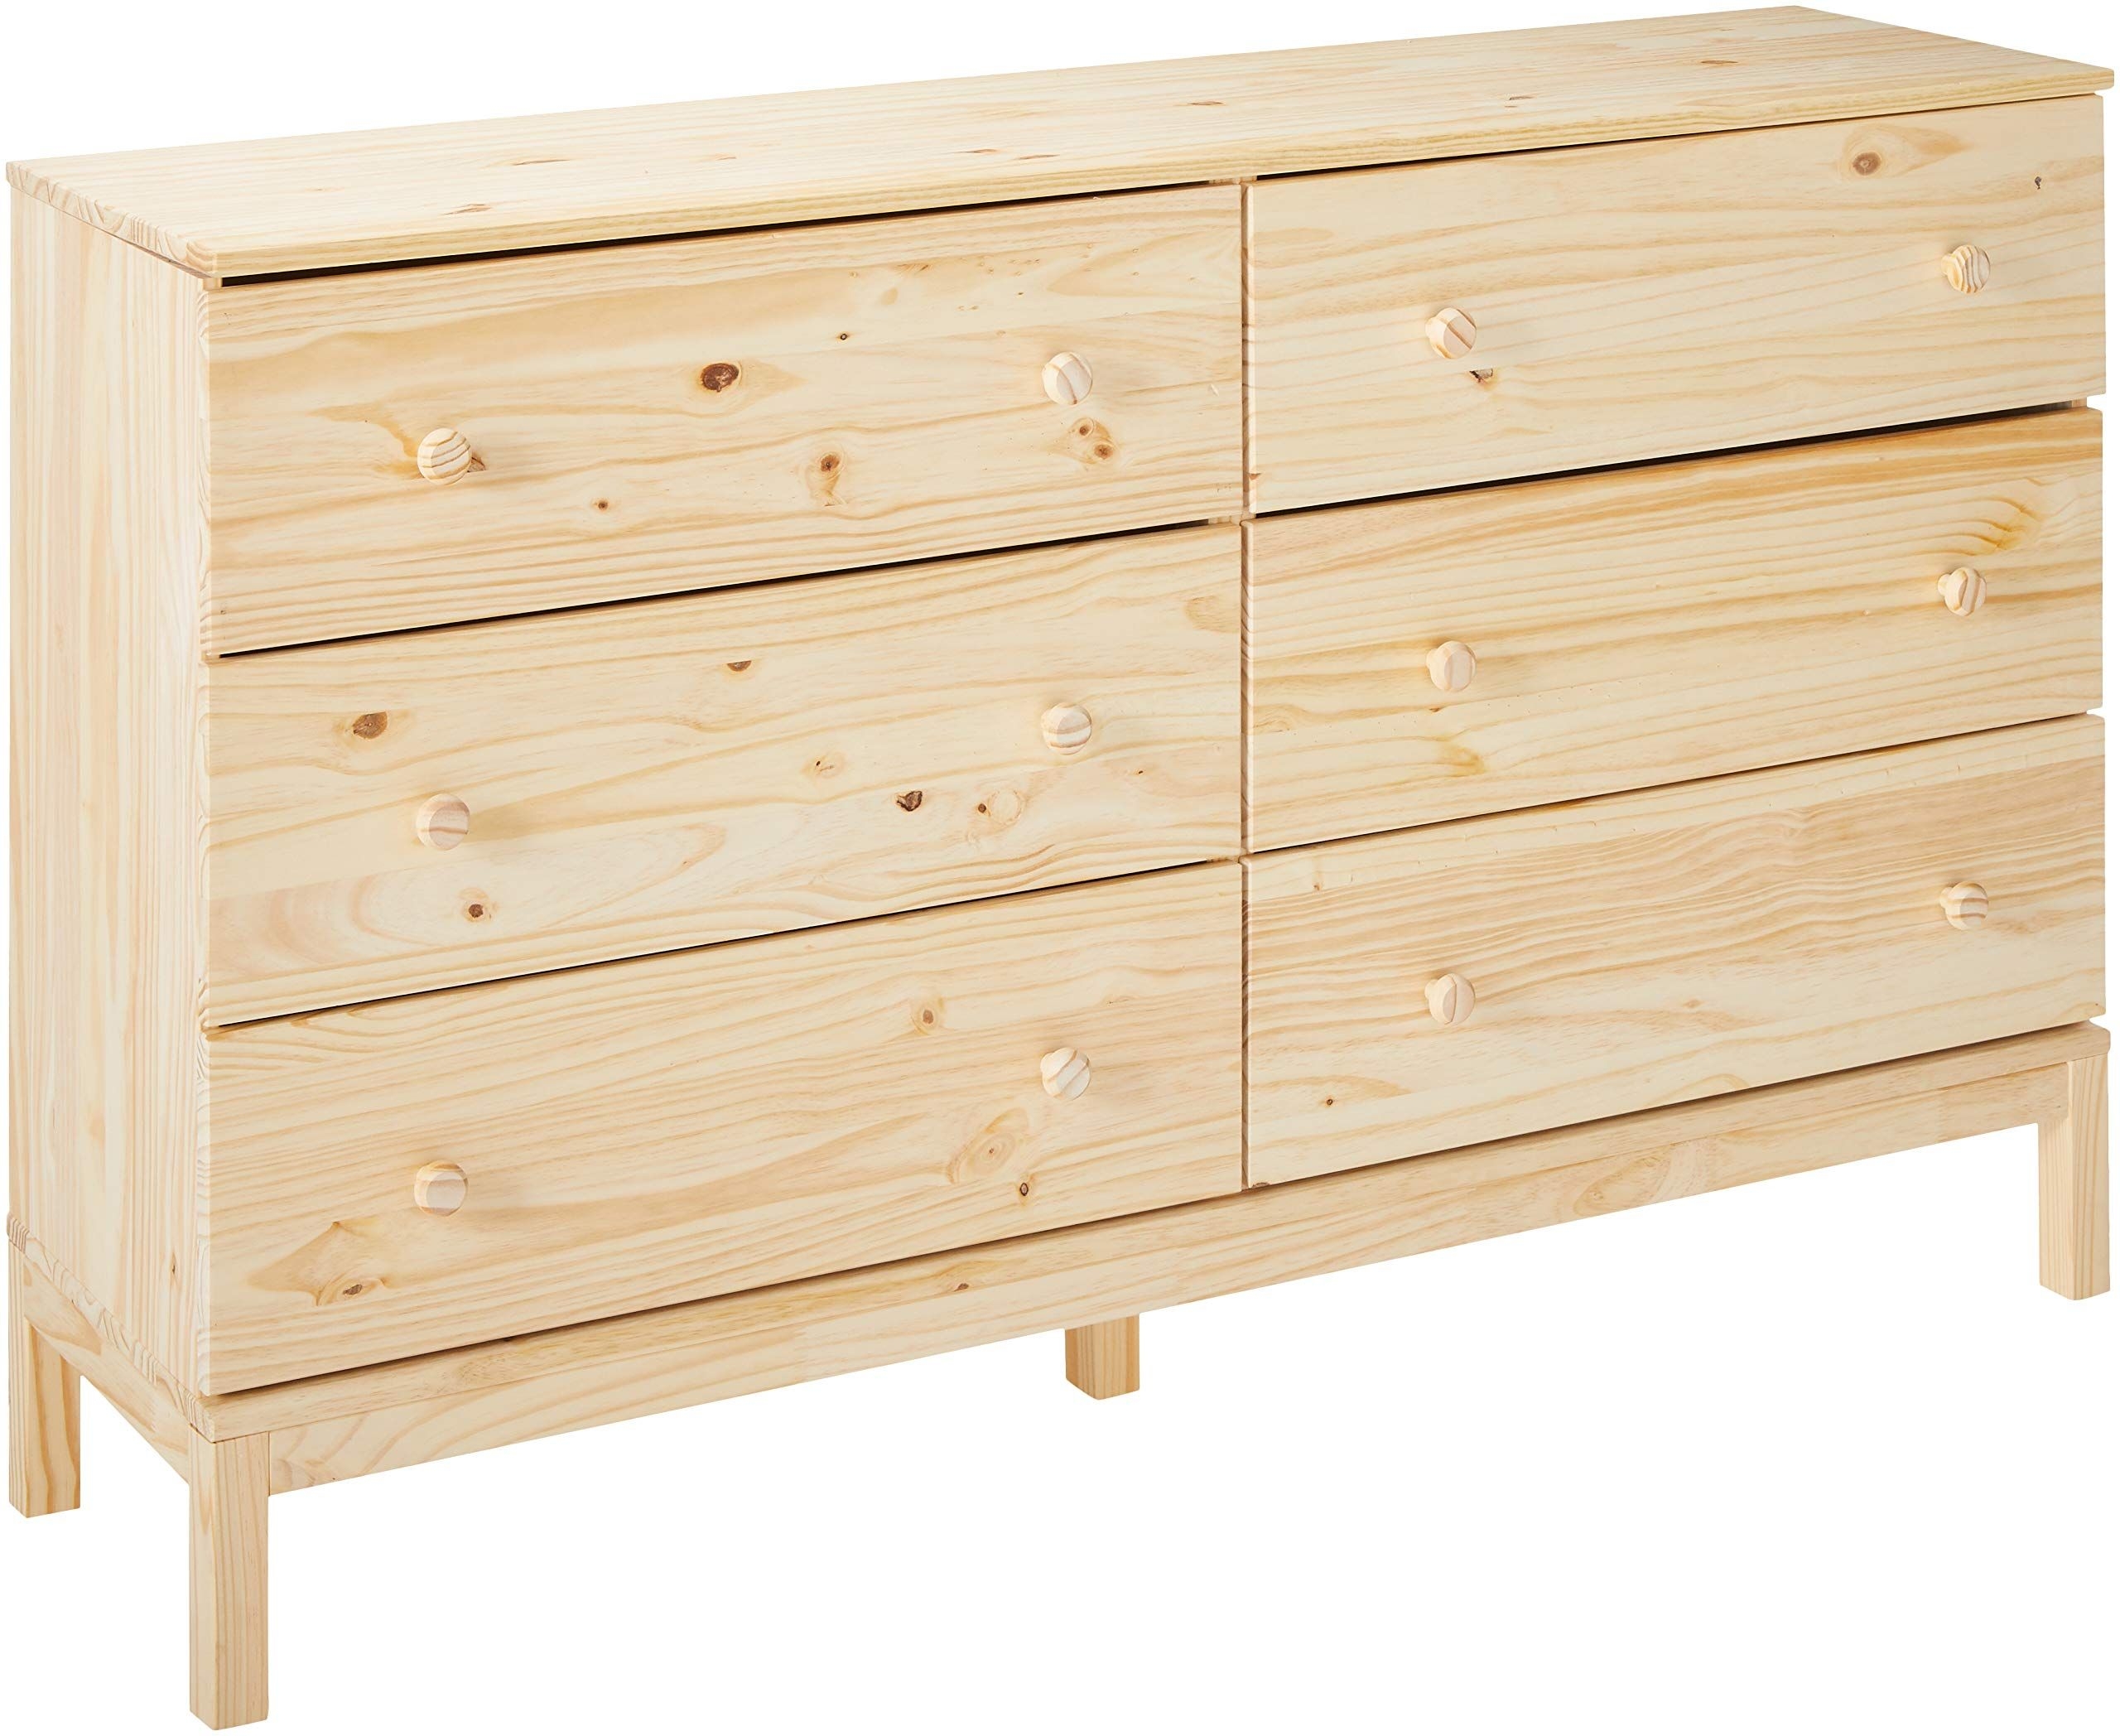 Solid Wood Chest Of Drawers You Ll Love In 2021 Visualhunt